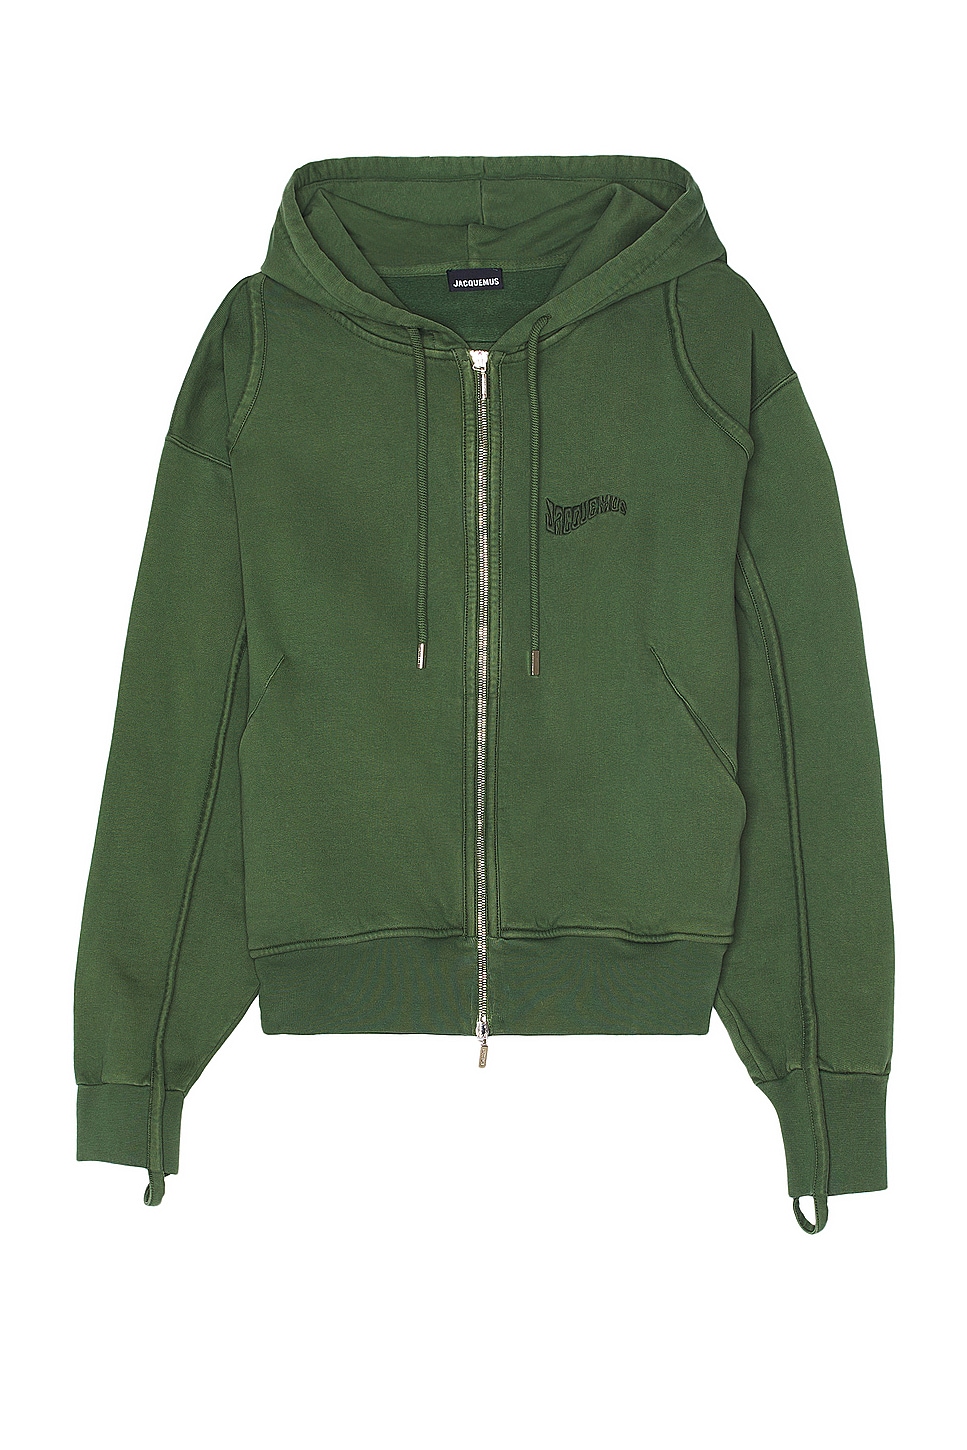 Image 1 of JACQUEMUS Le Sweater Camargue Zipper in Dark Green